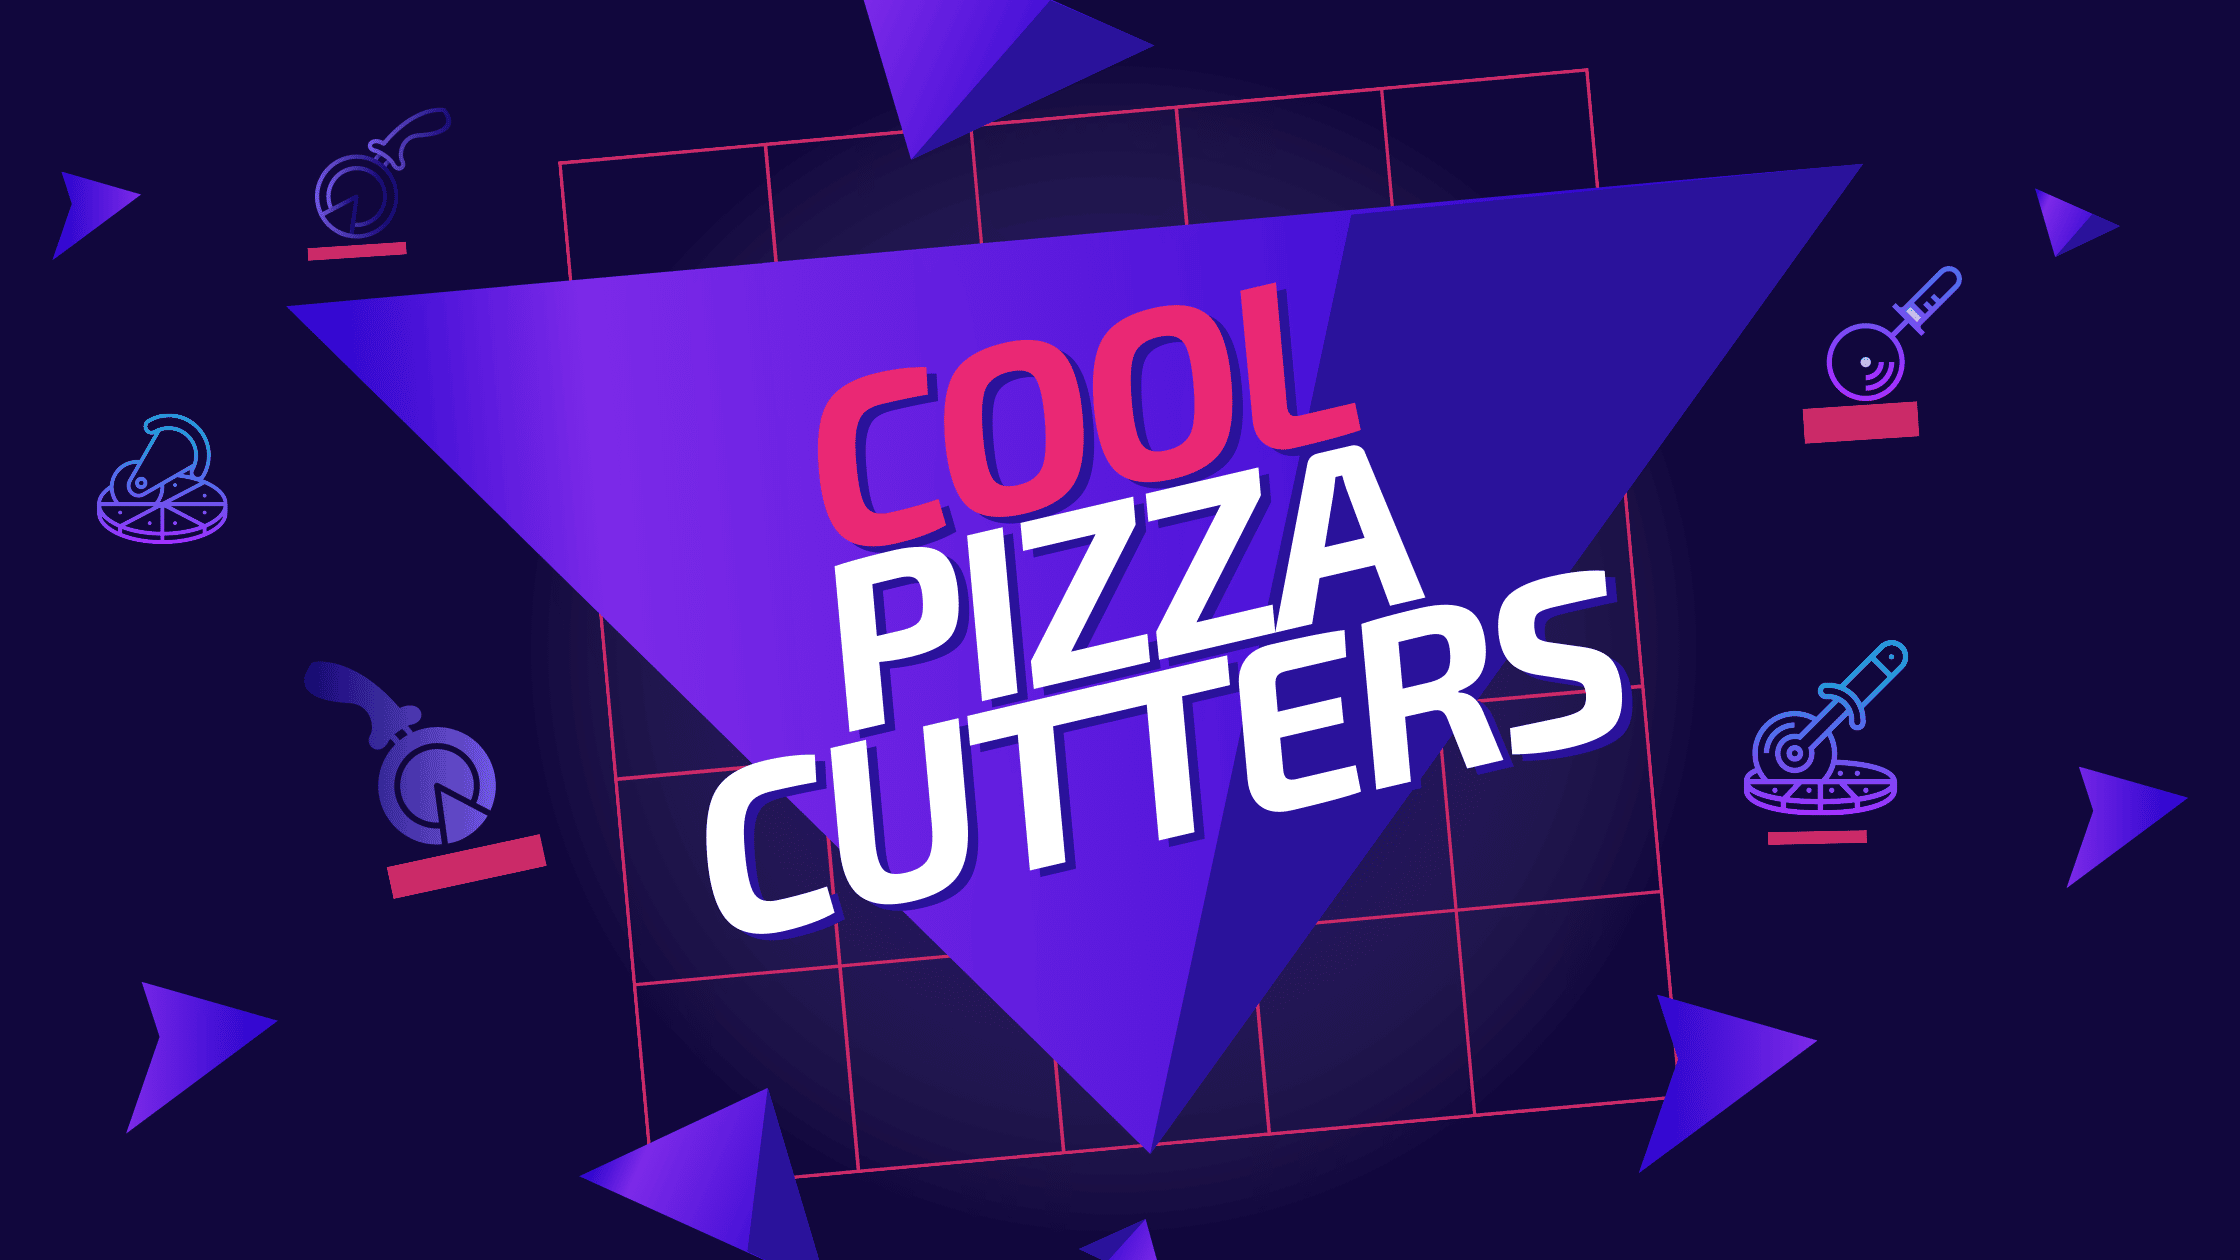 Cool pizza cutters